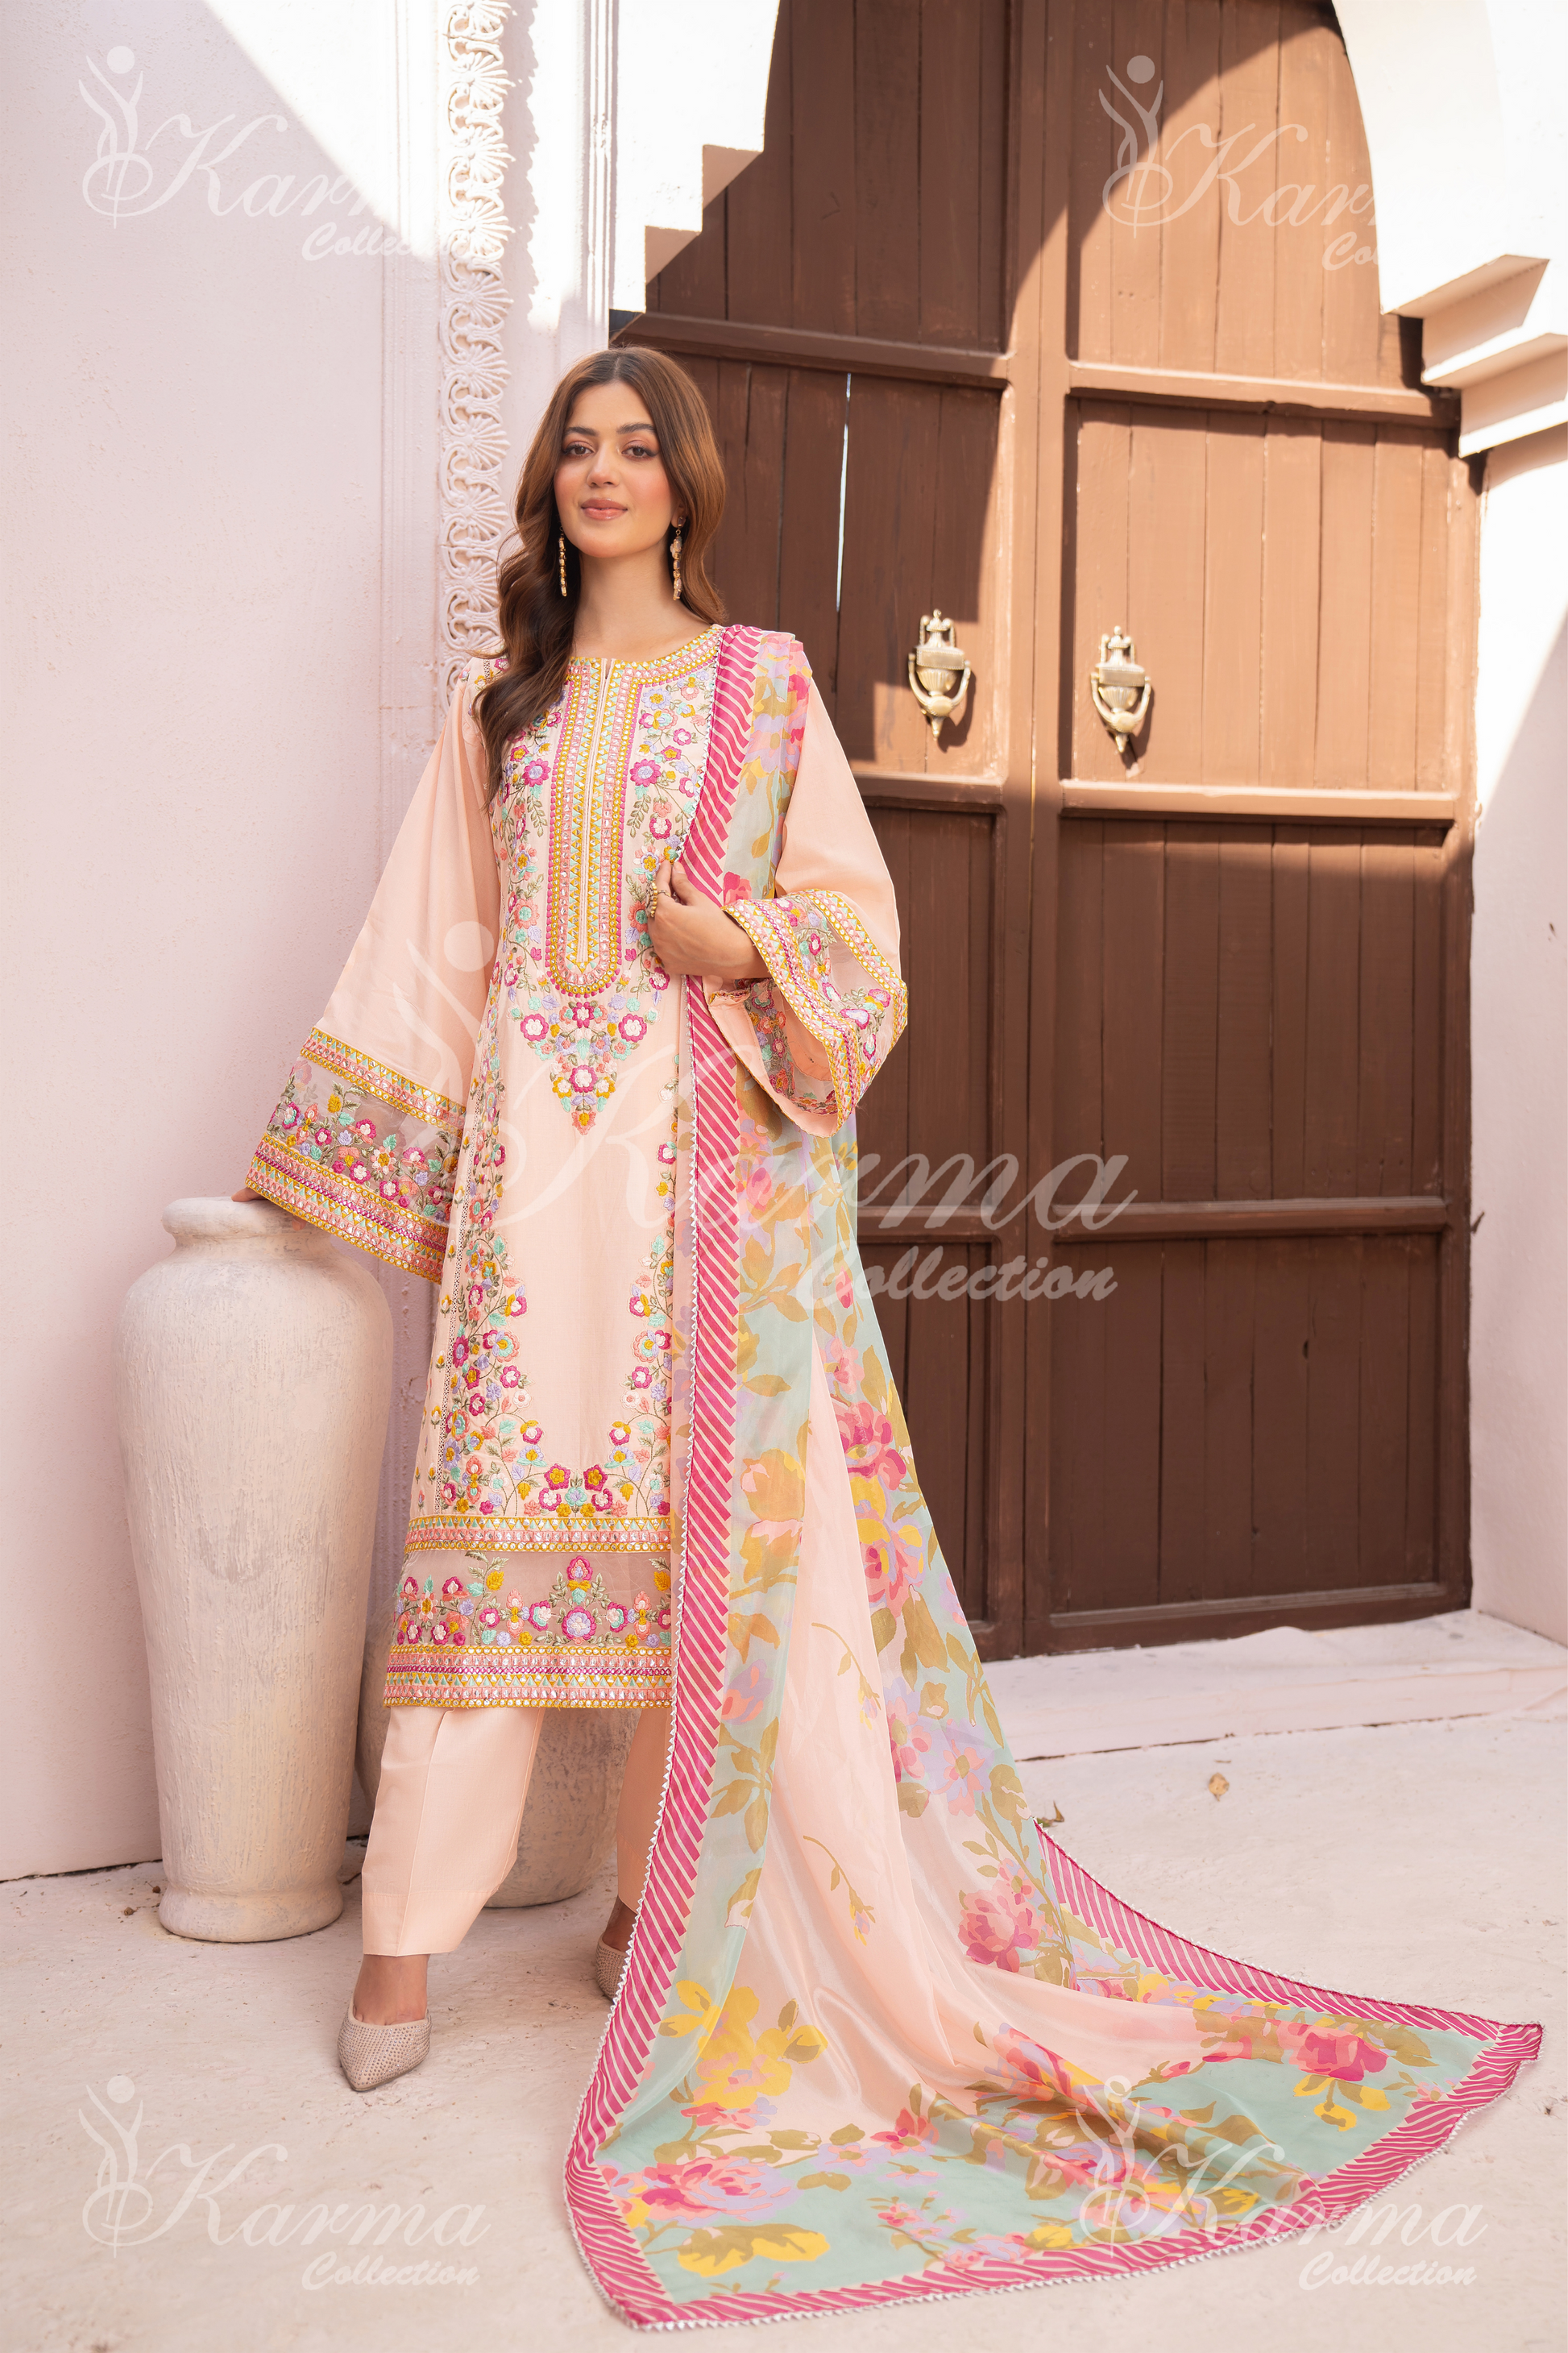 Karma Hot Pink 3 Piece Lawn Outfit